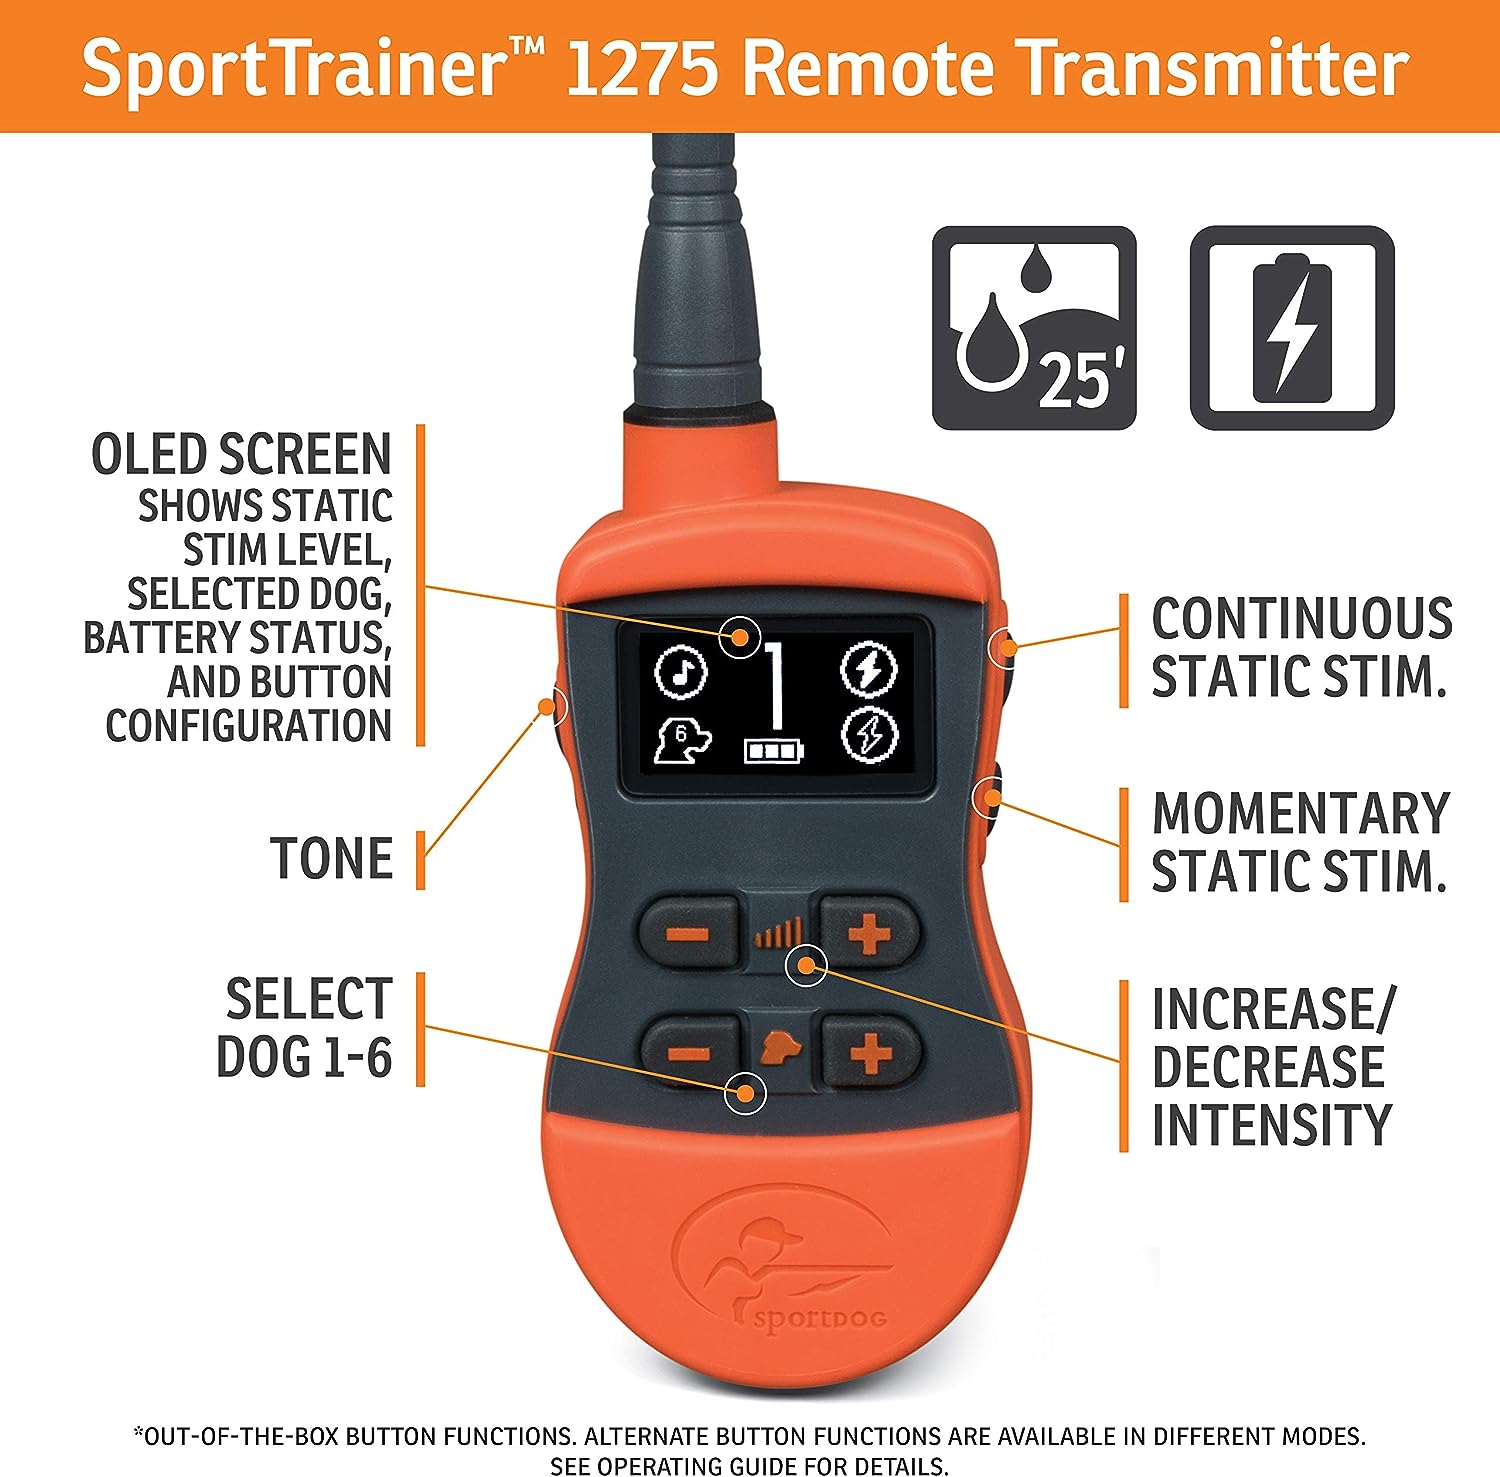 SportDOG Brand SportTrainer Remote Trainers - Bright, Easy to Read OLED Screen - Waterproof, Rechargeable Dog Training Collar with Tone, Vibration, and Static, 3/4 Mile Range - 6 Dog Expandable